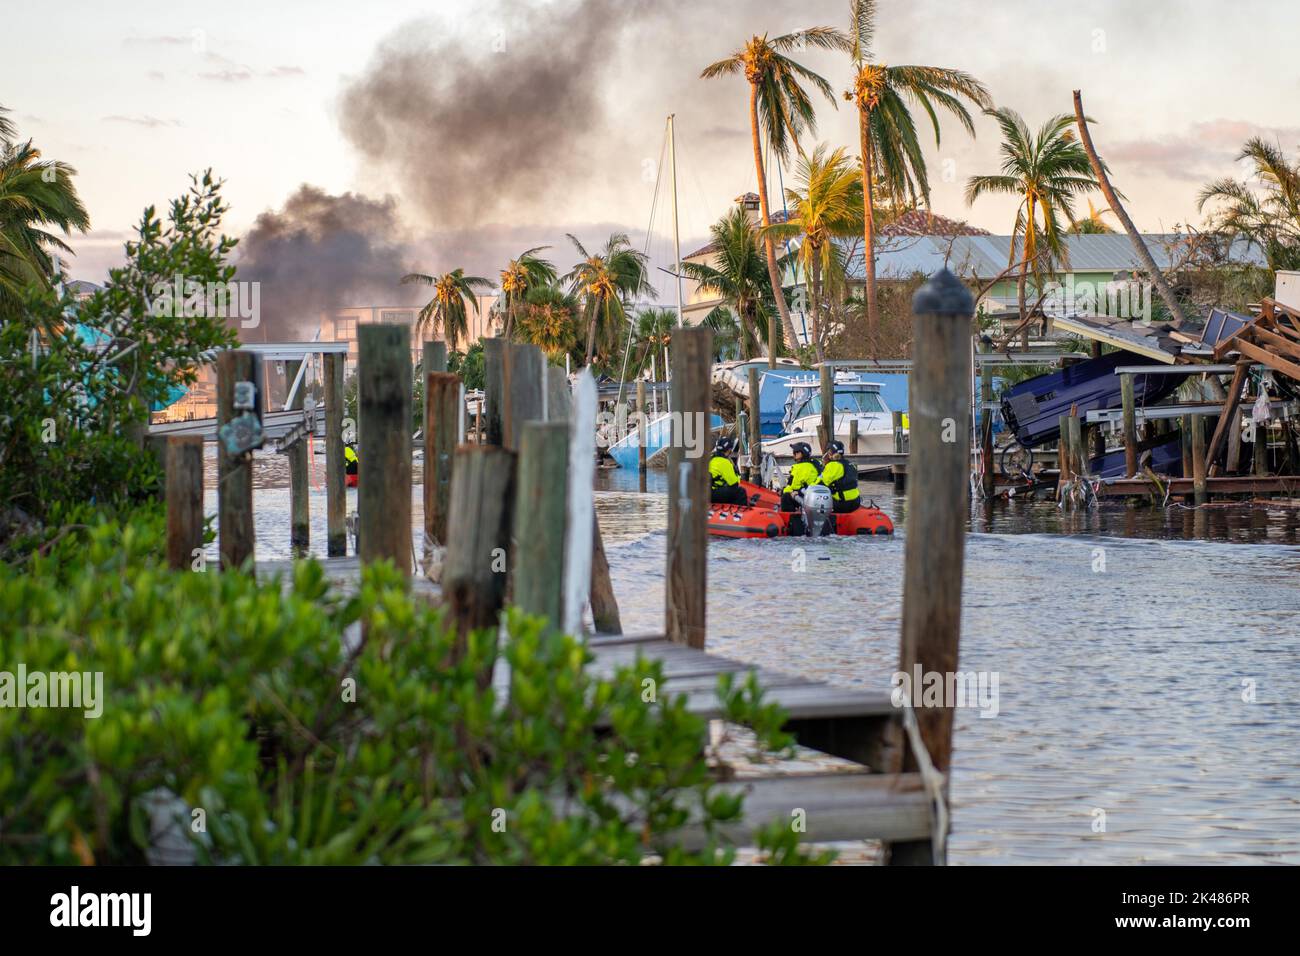 In the aftermath of catastrophic Hurricane Ian, Coast Guard personnel navigate canals in Fort Myers Beach, Florida, during search and rescue operations on September 29, 2022. (USA) Stock Photo